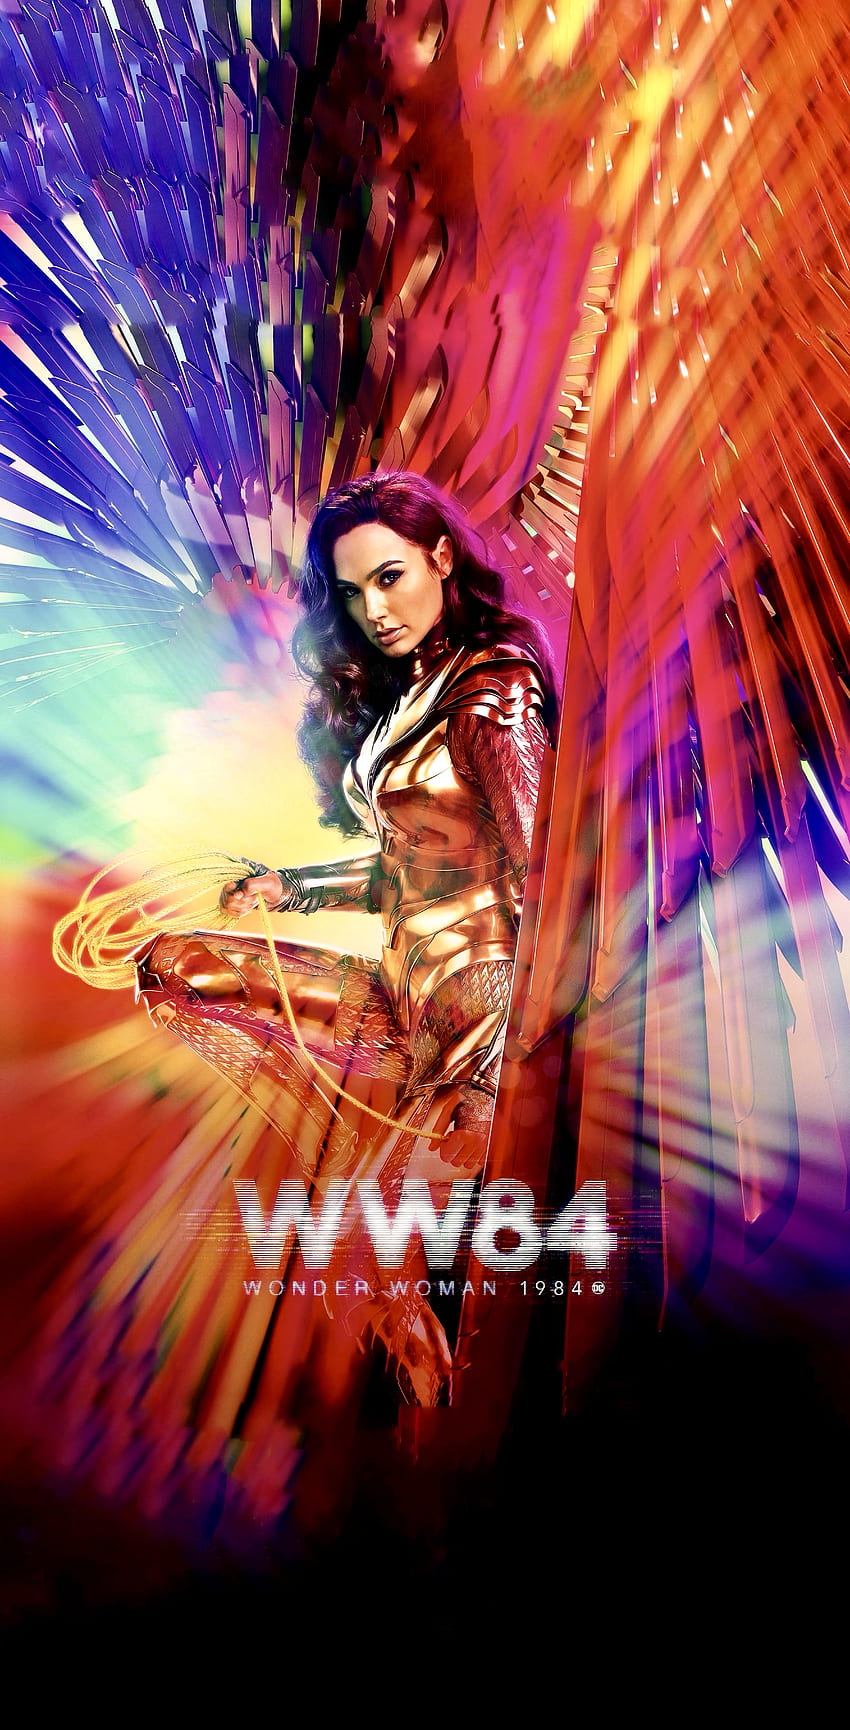 Wonder Woman 1984 (made the new poster taller) in 2020. New poster, Wonder woman movie, Wonder woman, WW84 HD phone wallpaper